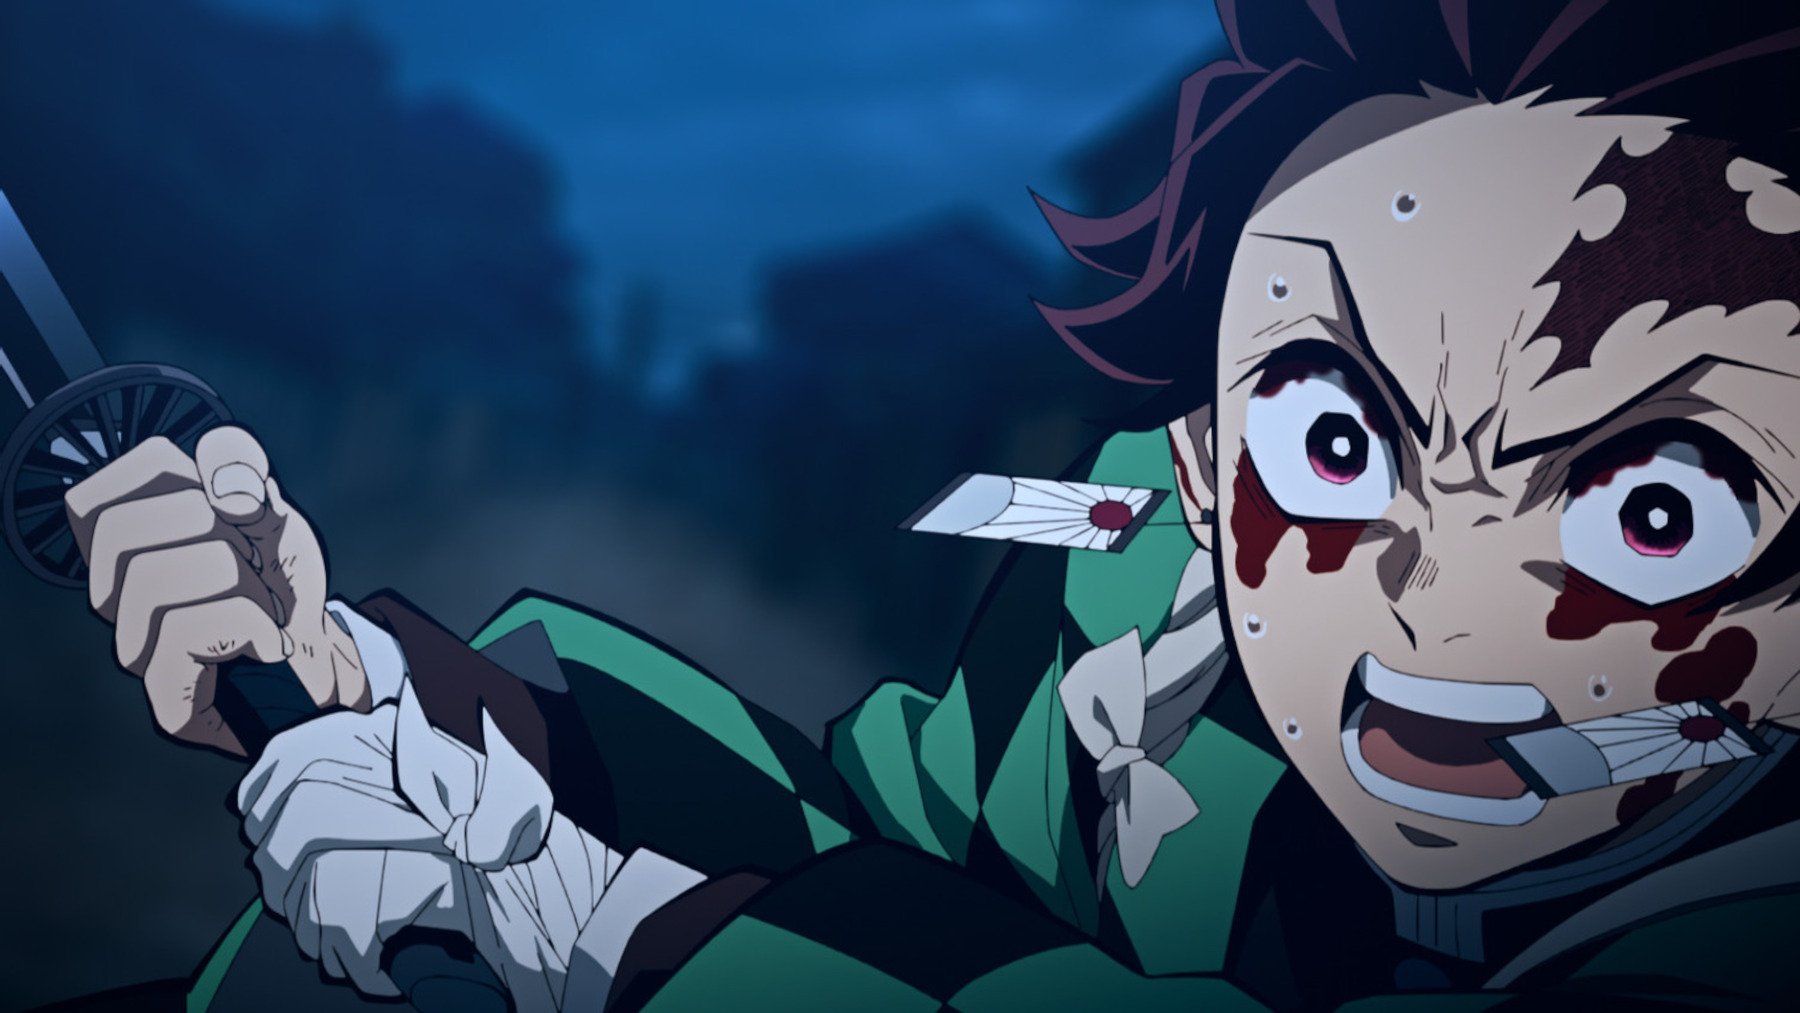 Demon Slayer Season 3 Episode 1: Expected Release Date and Time